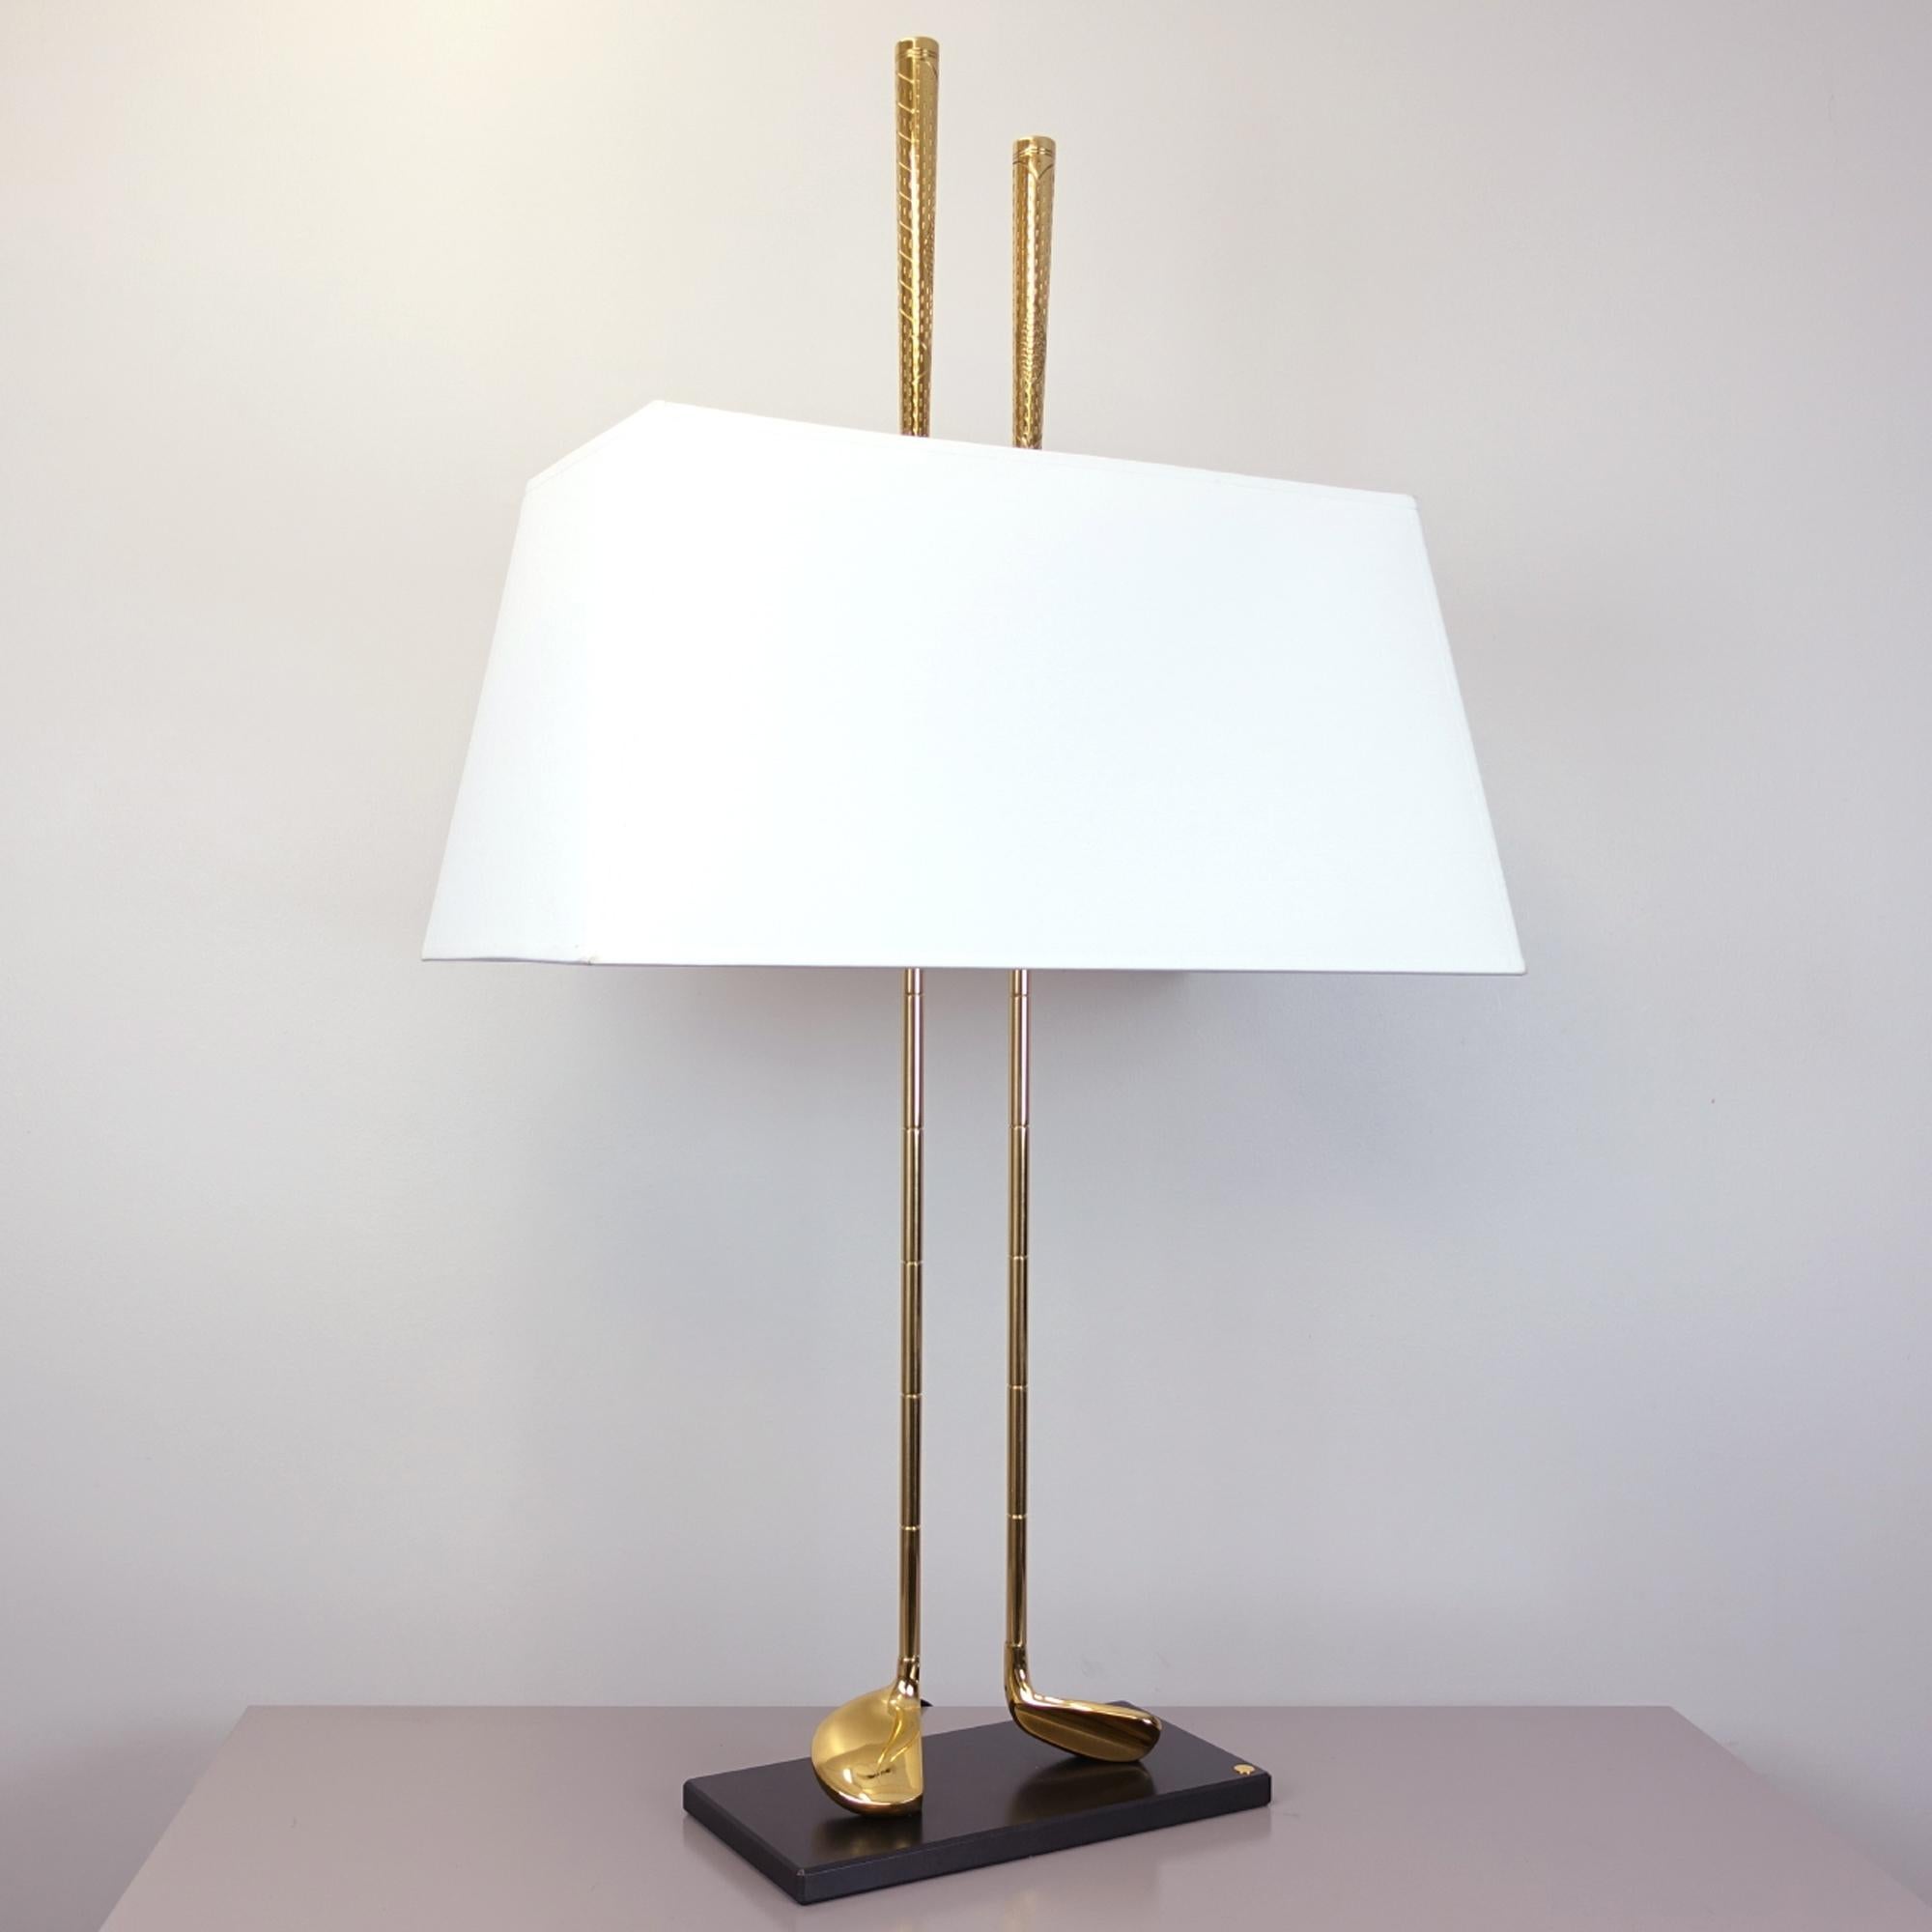 Table lamp Golf Club with 2 clubs in brass in
polished brass finish. With white shade 
included. 2 bulbs, lamp holder type E14,
max. Limited Edition. Edition of 100 pieces.
Made in France.
With customizable plaque to write a name
or a company,